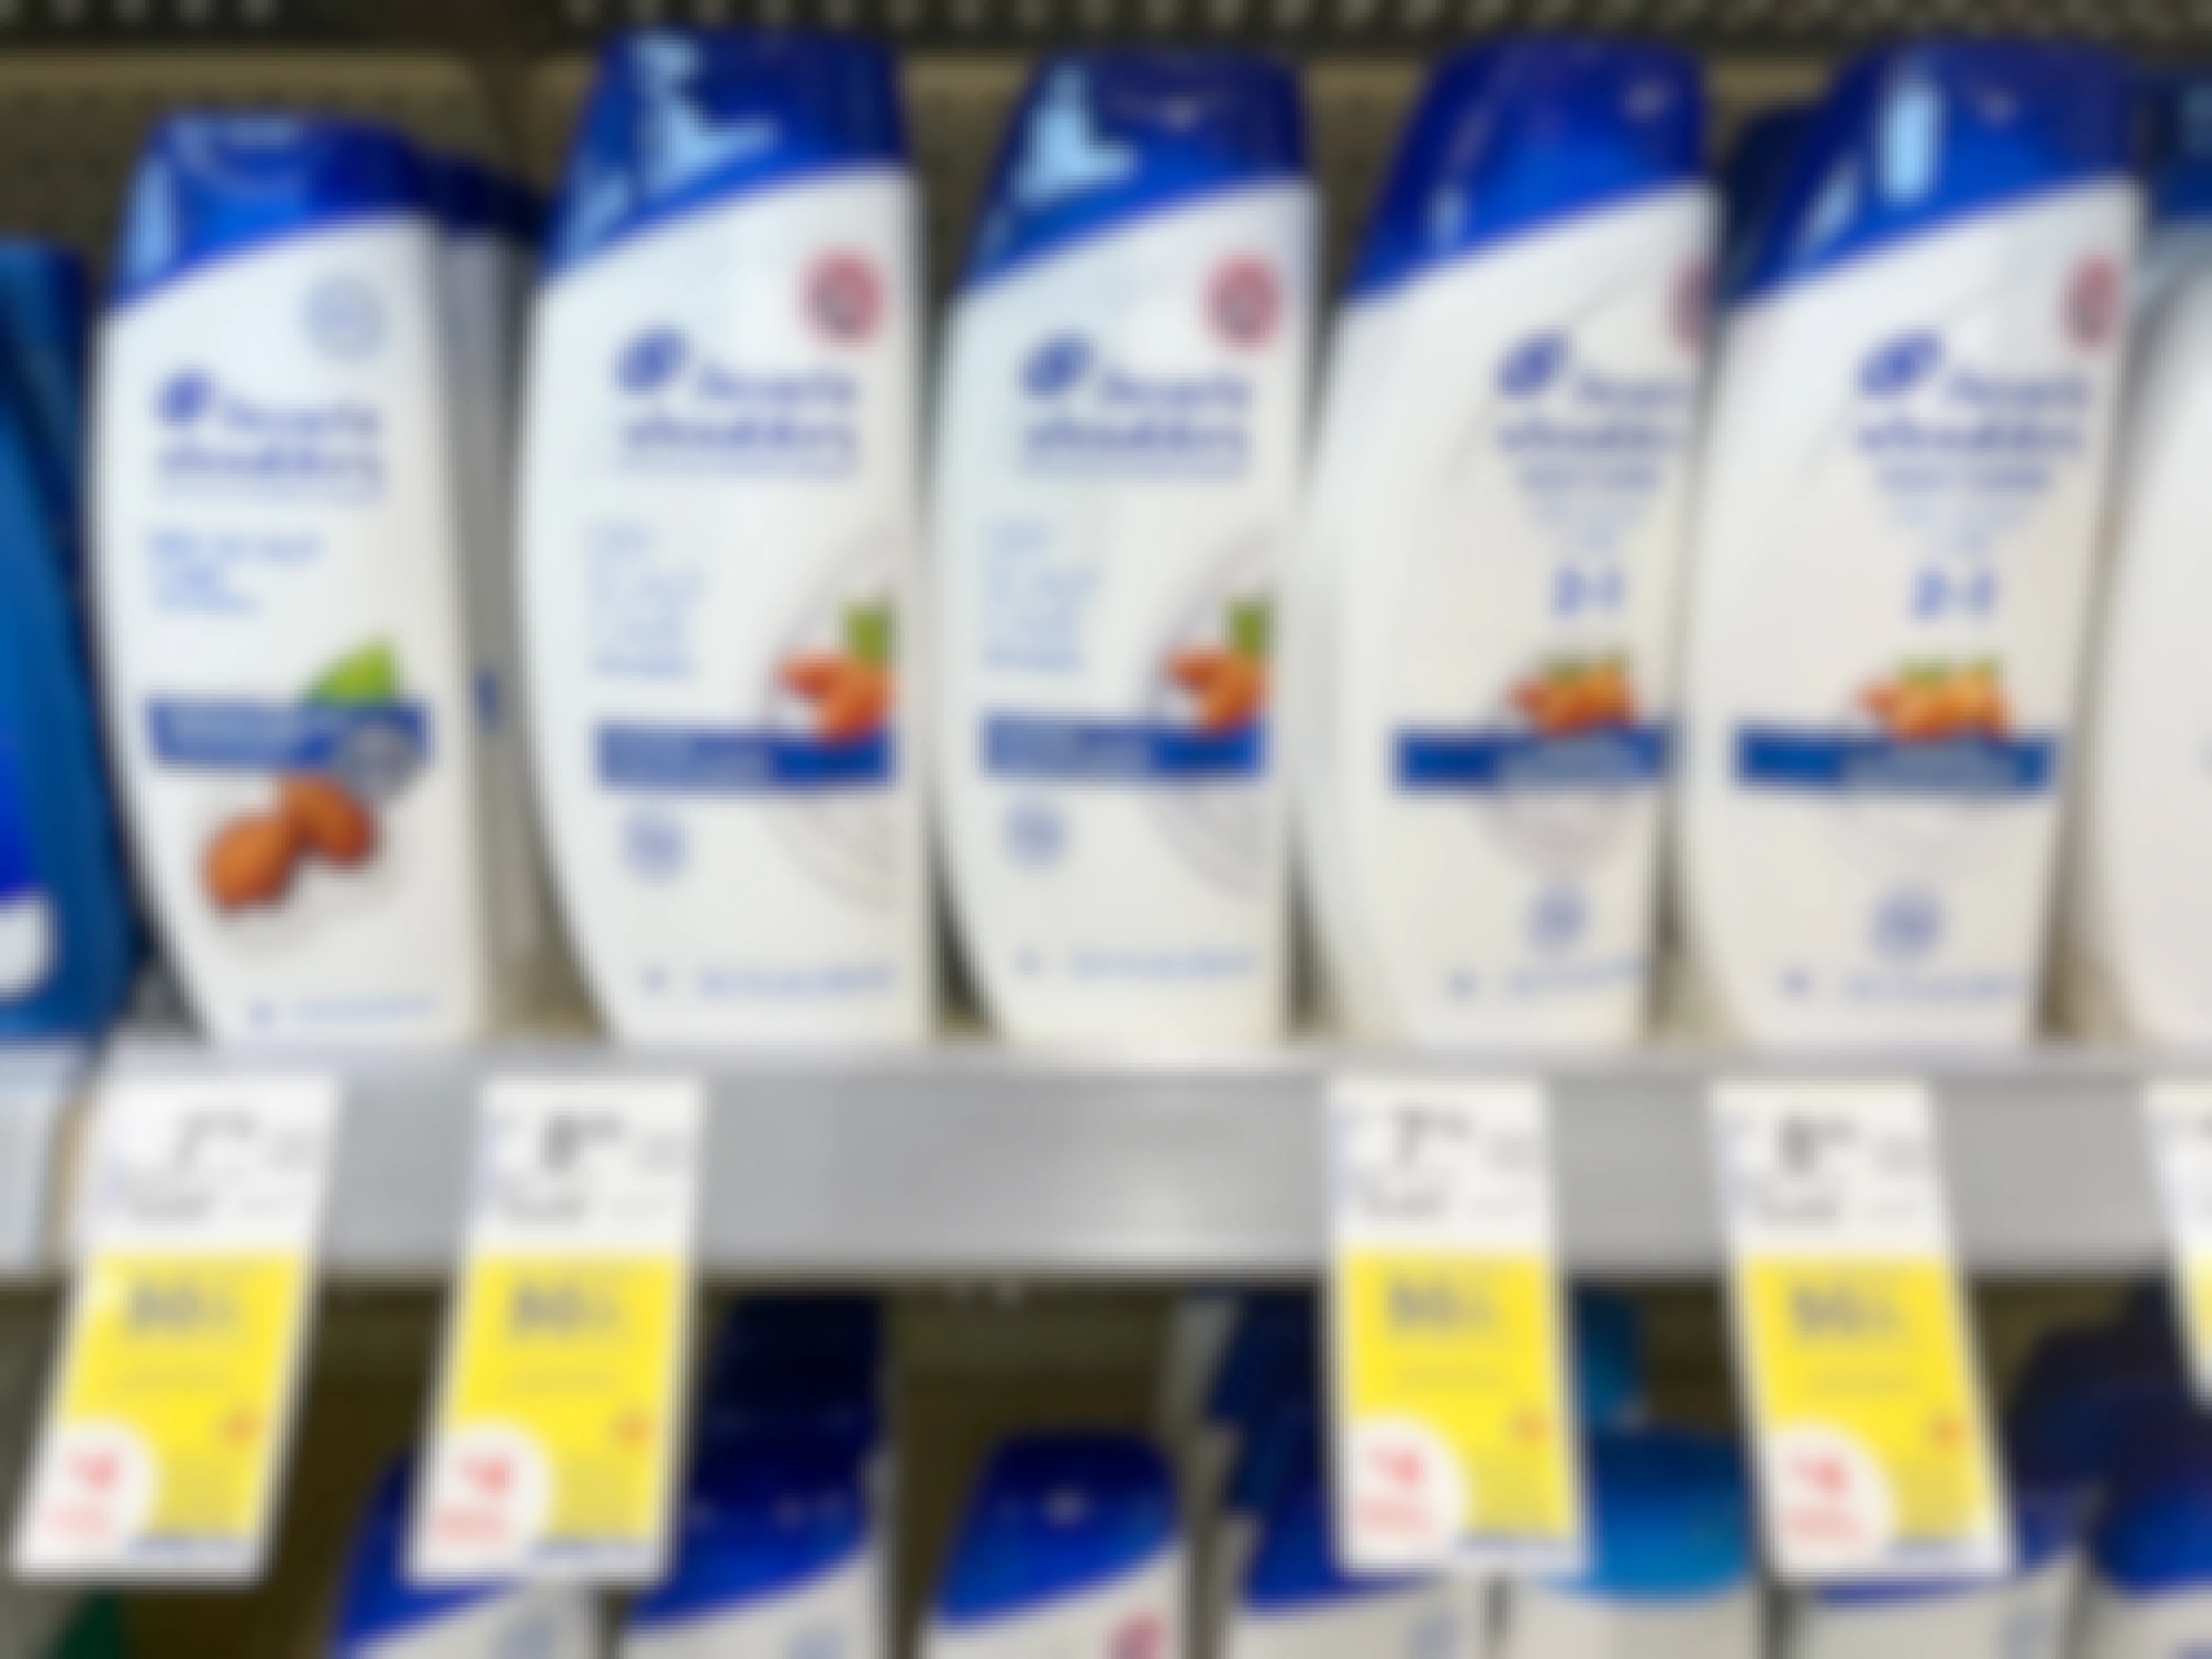 head and shoulders hair care at walgreens with shelf tags